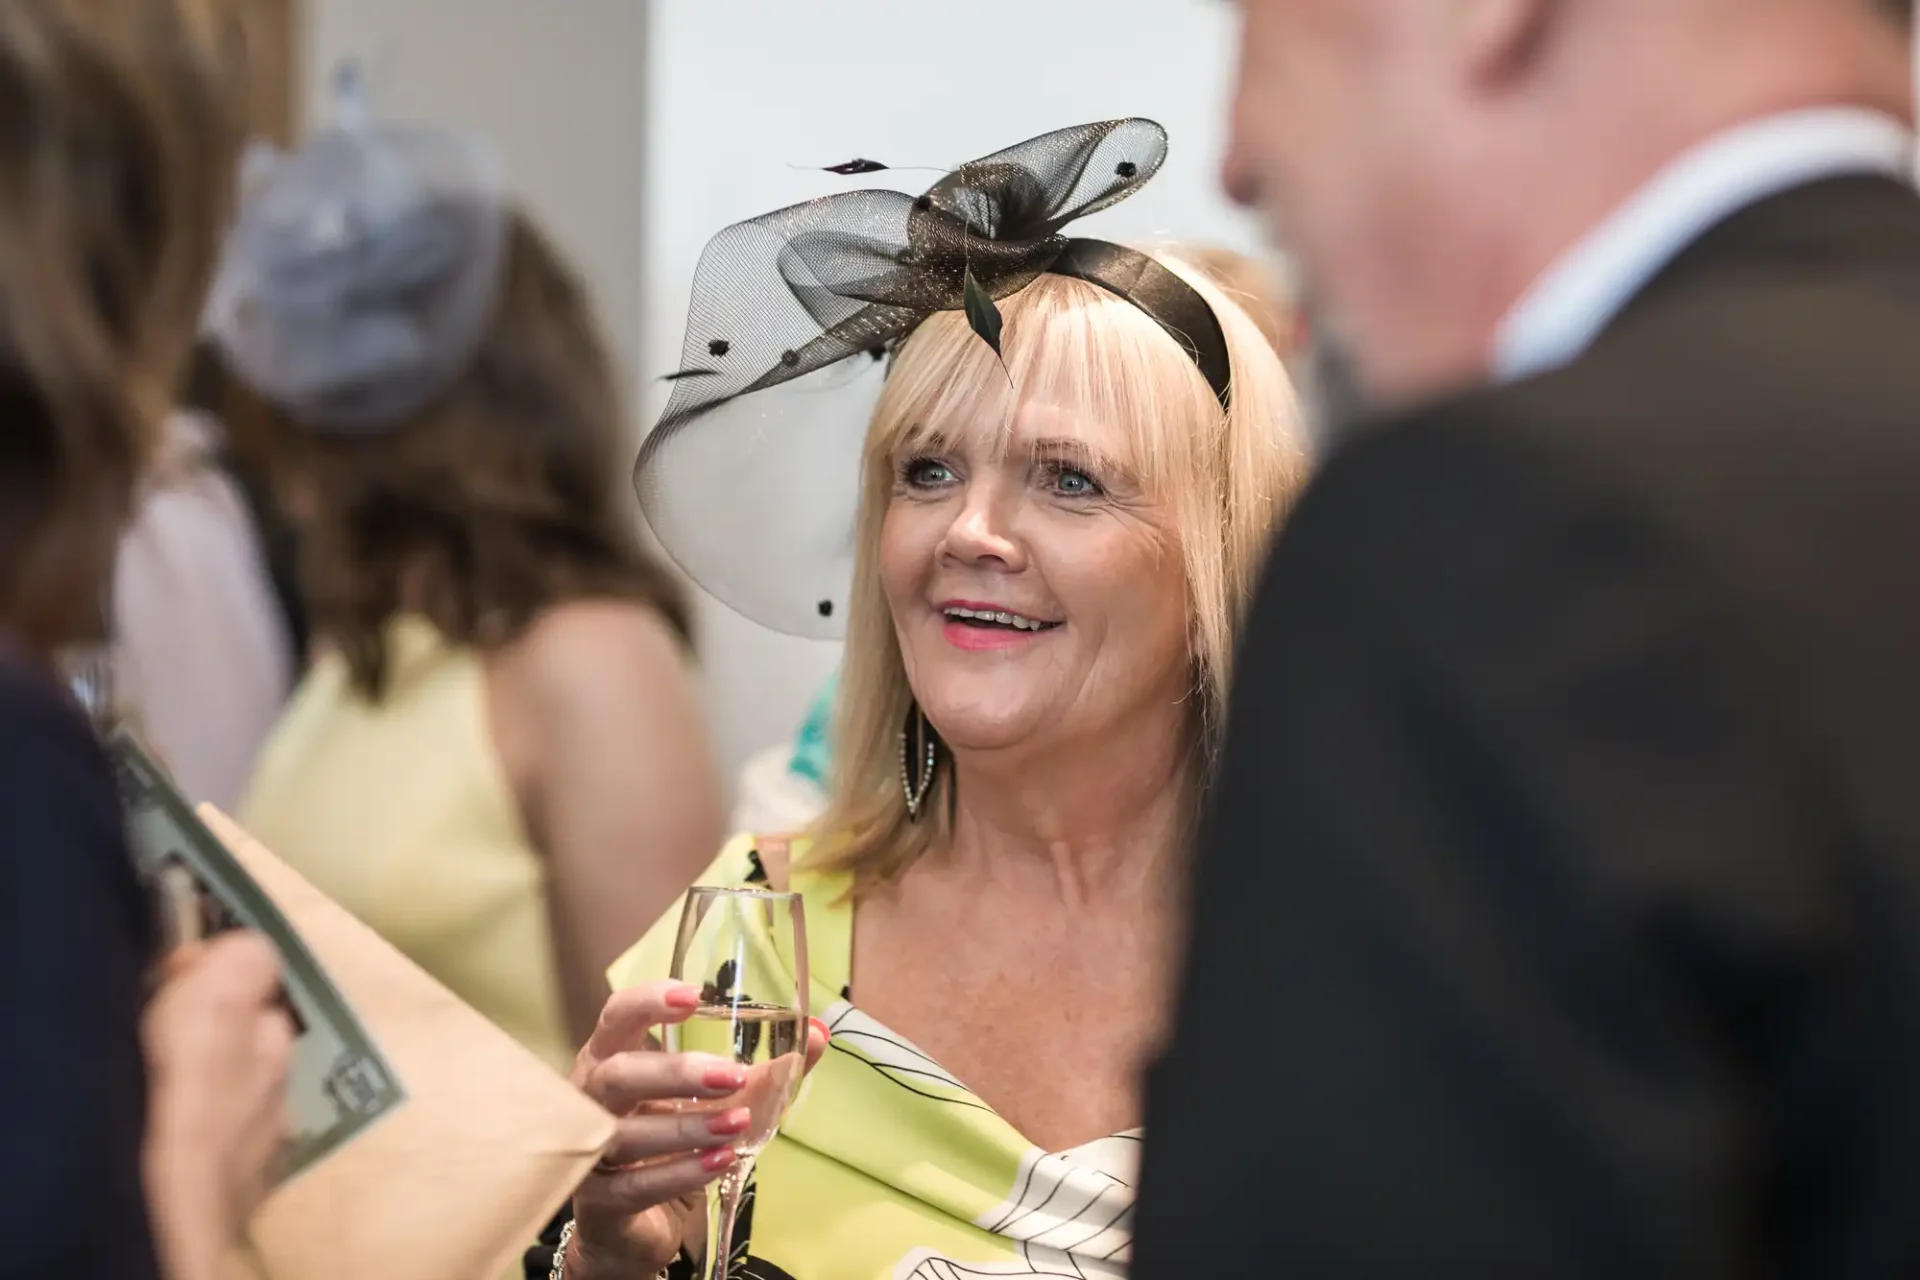 A woman in a black and white hat holding a champagne glass converses at a social event.